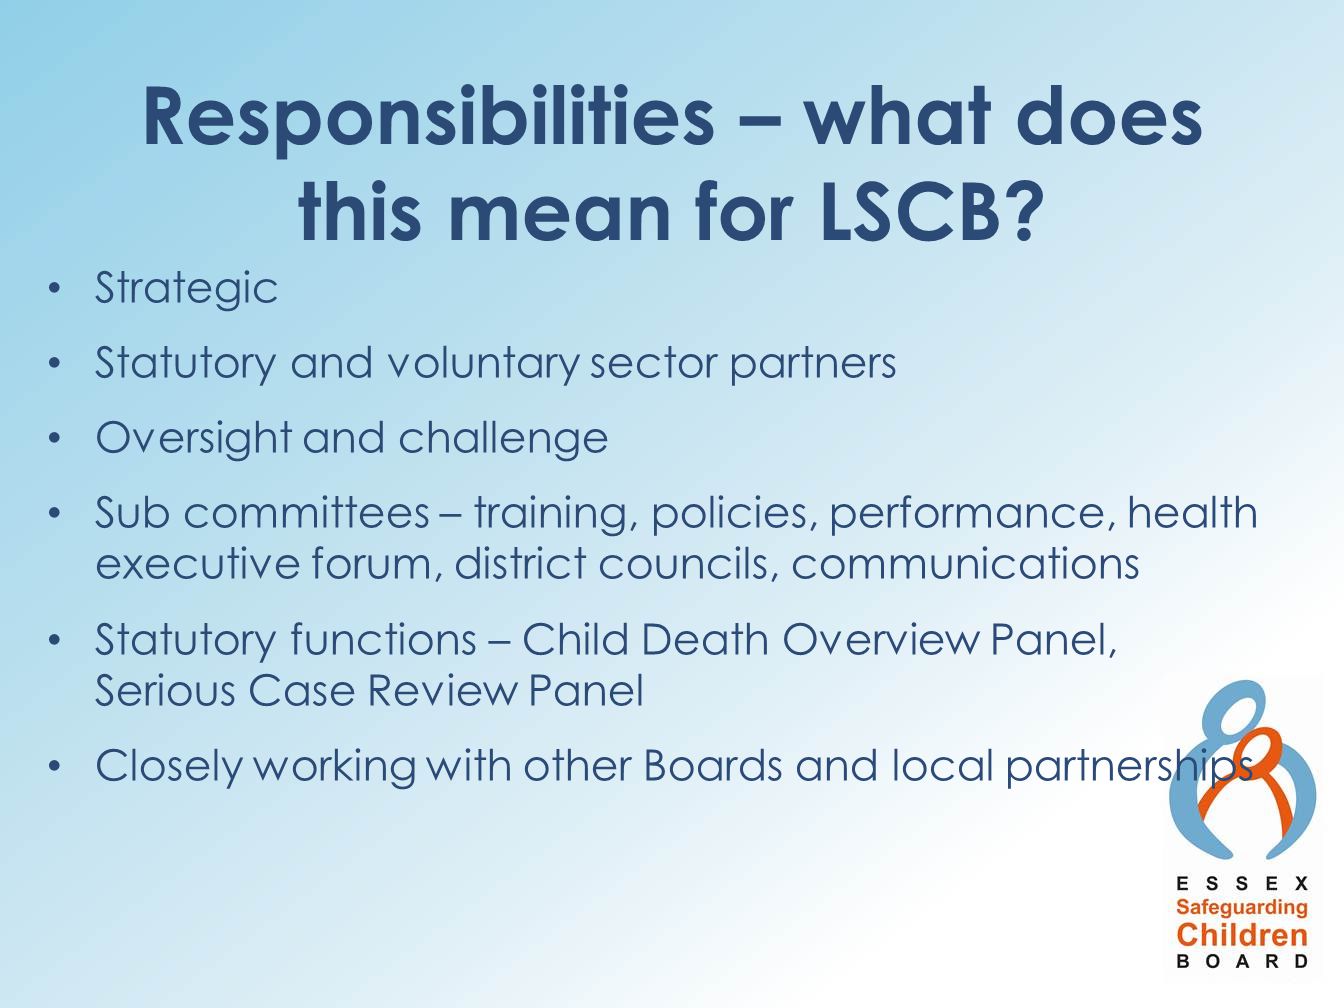 Responsibilities – what does this mean for LSCB